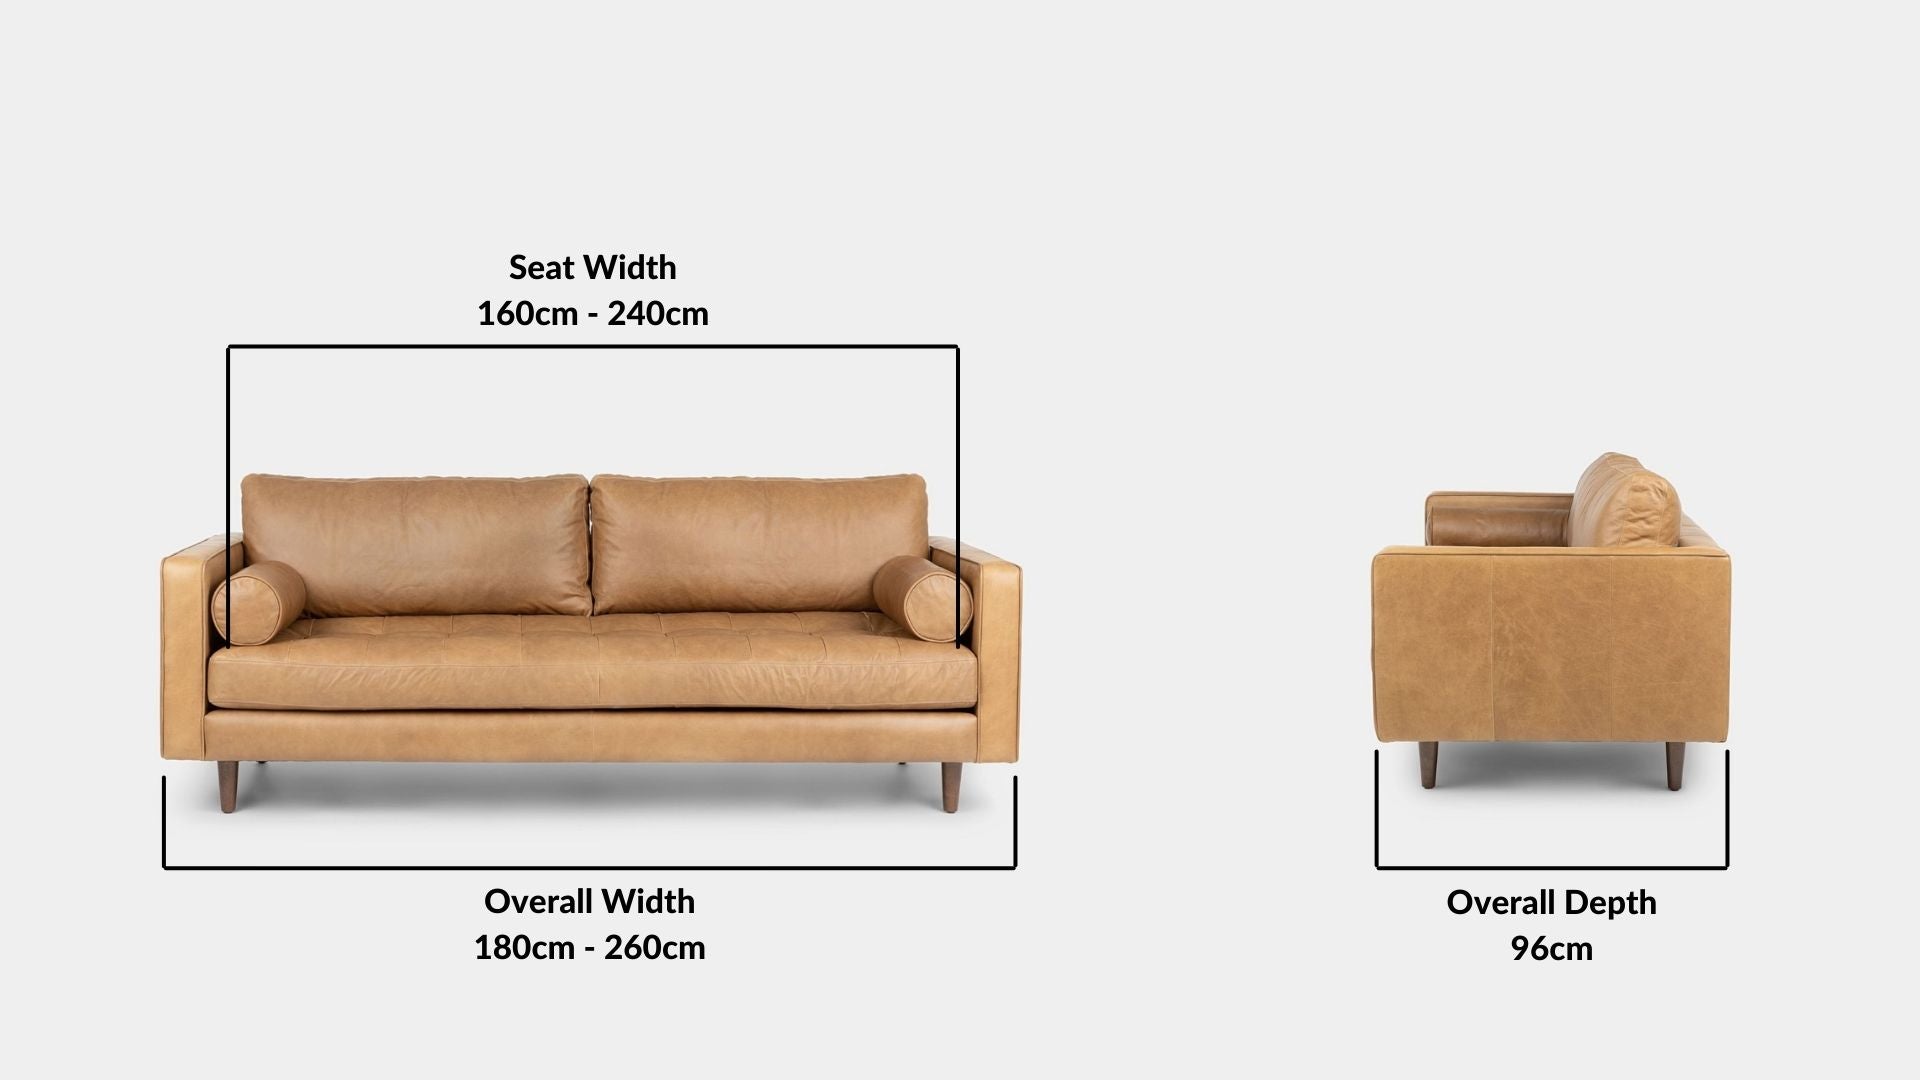 Details the key dimensions in terms of overall width, overall depth and seat width for Castle Half Leather Sofa